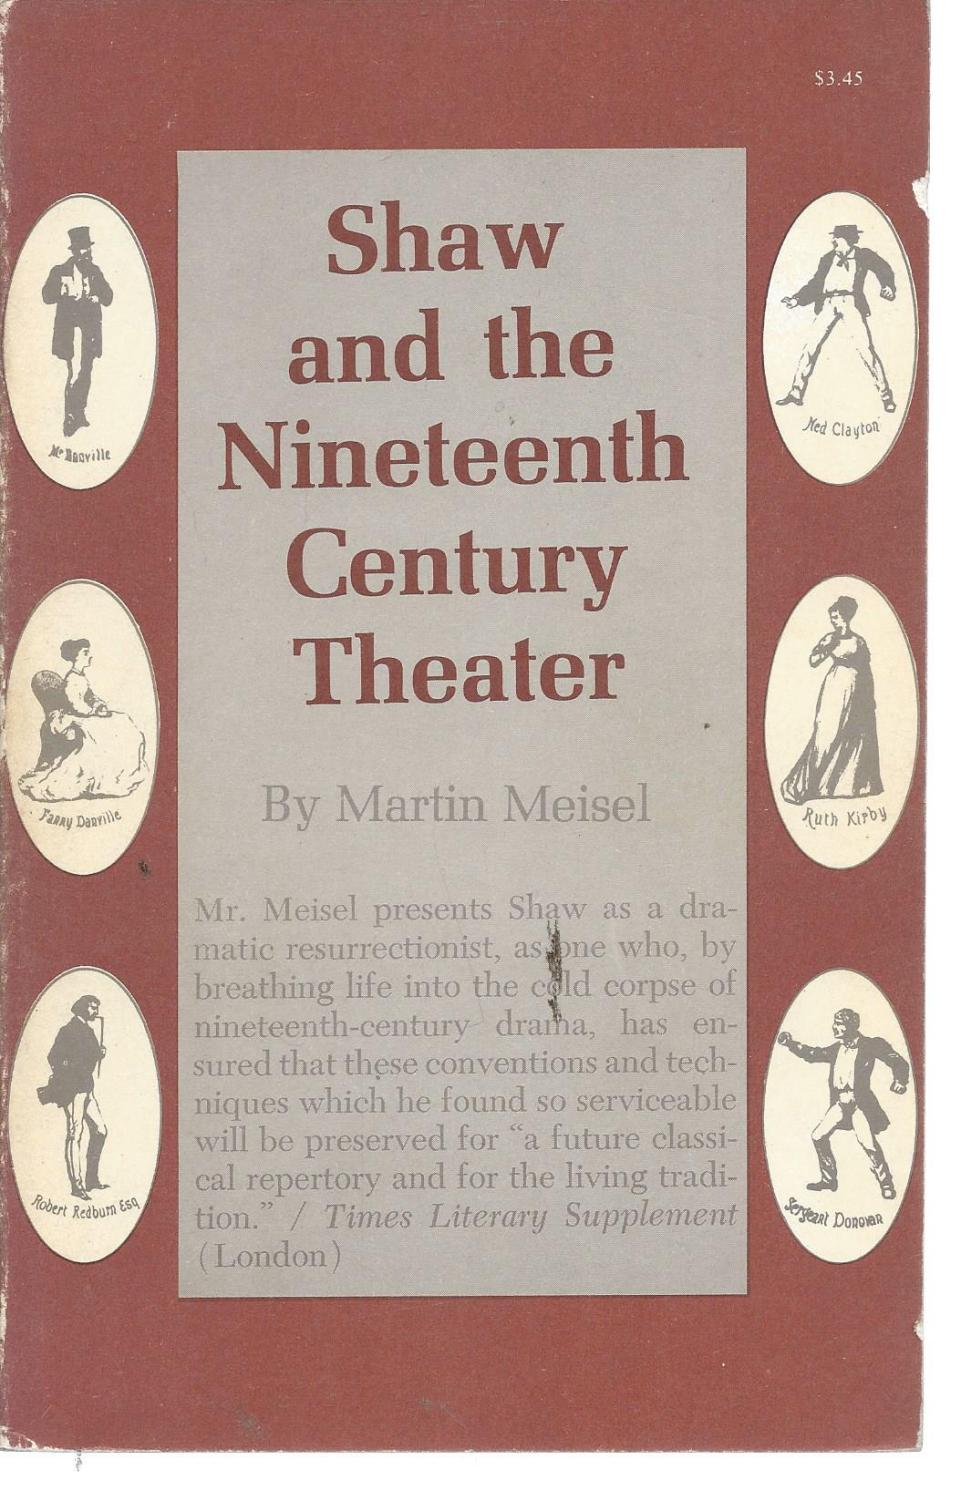 Shaw and the Nineteenth Century Theater - Meisel, Martin